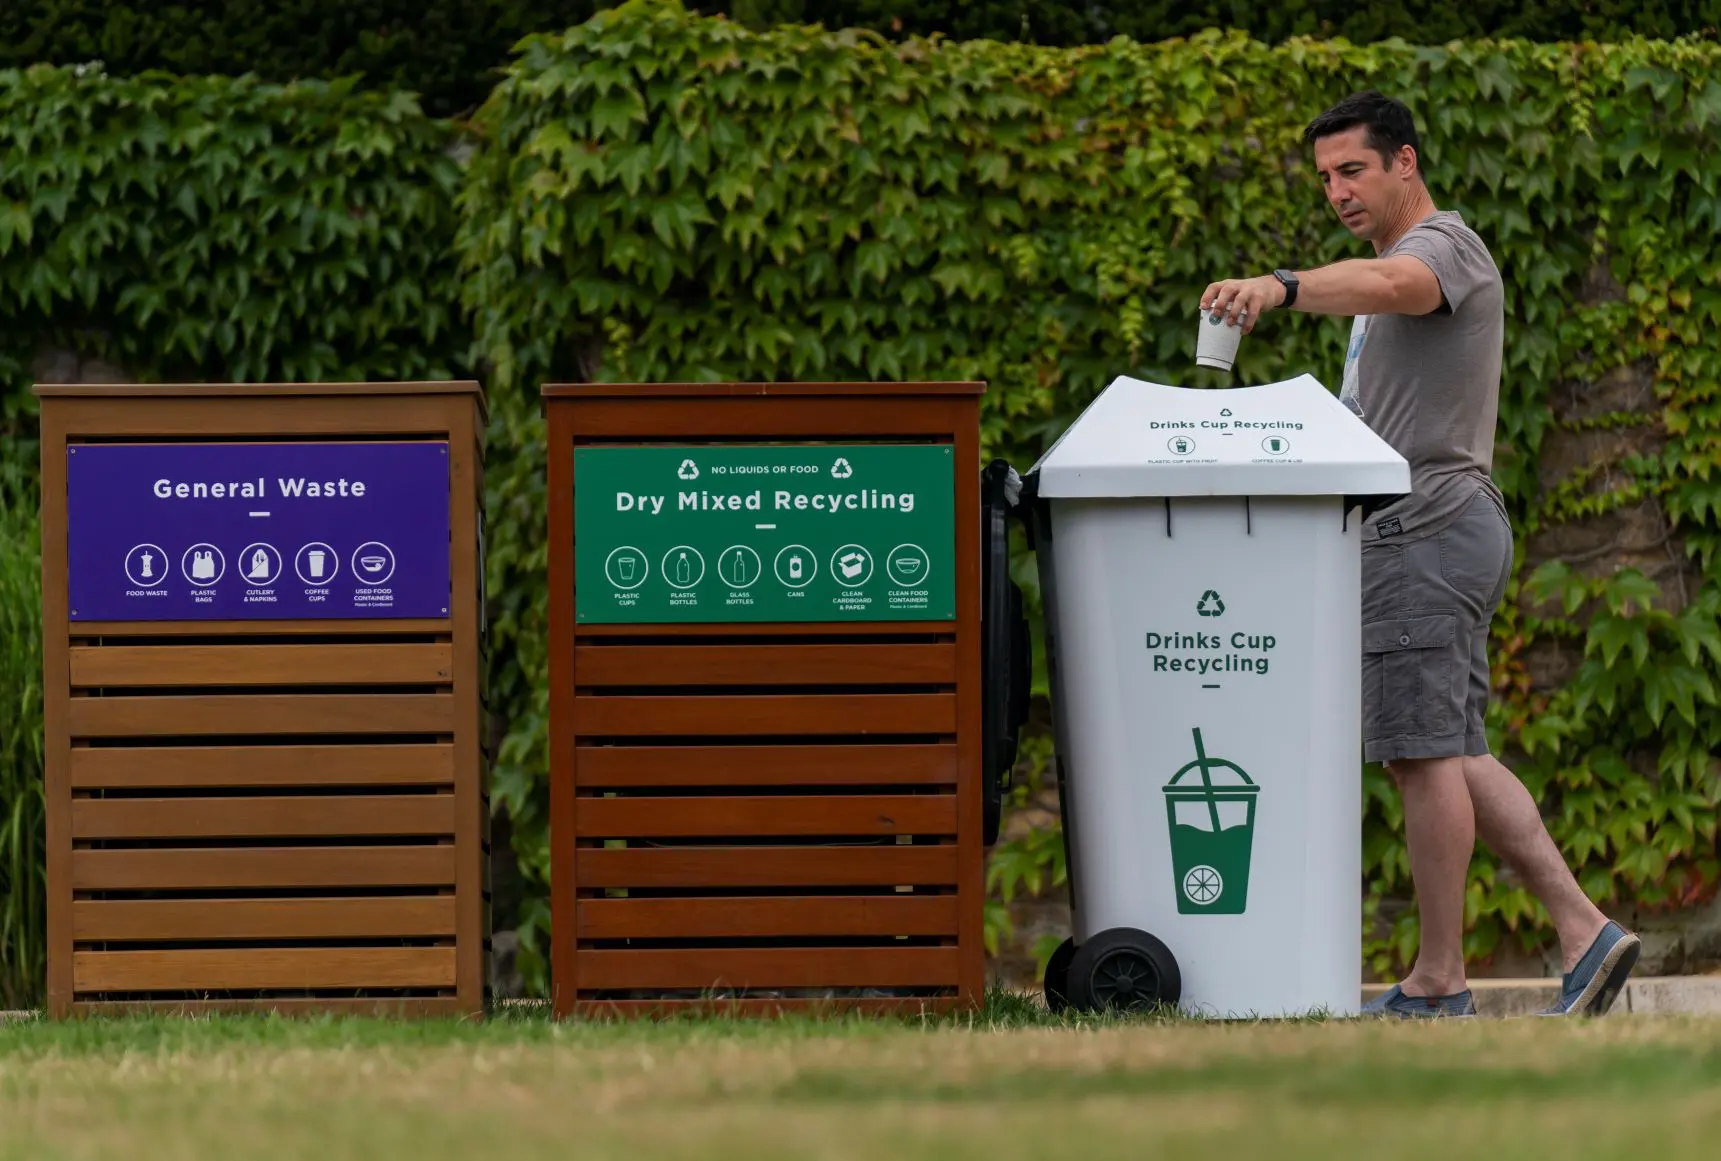 Amongst many improvements at The Championships 2019, clearly-marked bins have helped to avoid contamination